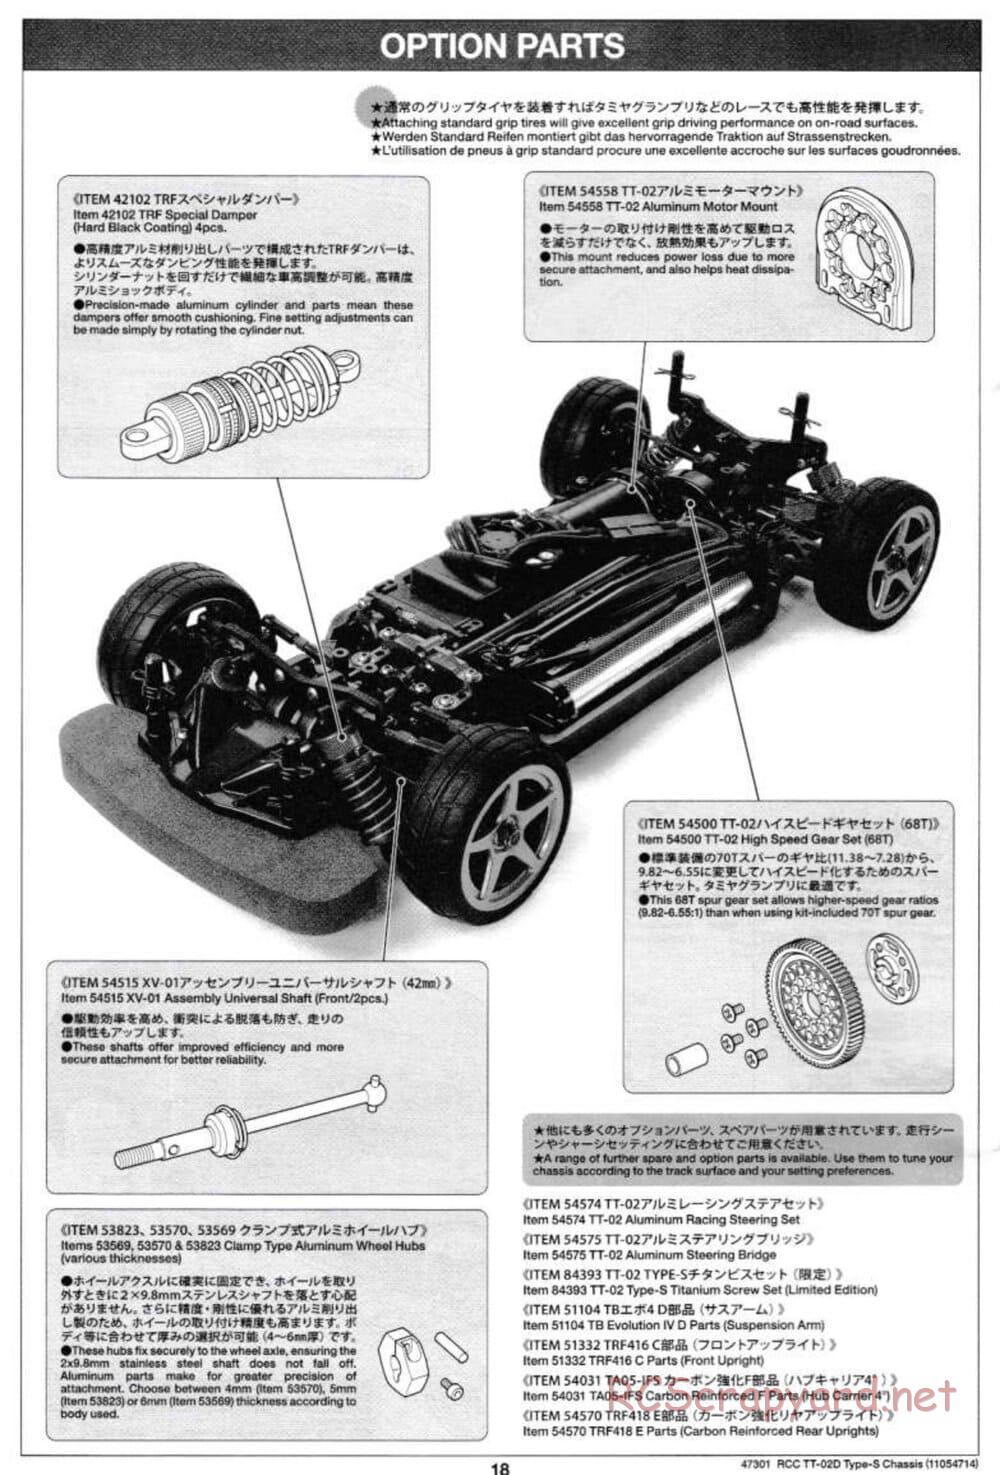 Tamiya - TT-02D Type-S Chassis - Manual - Page 18